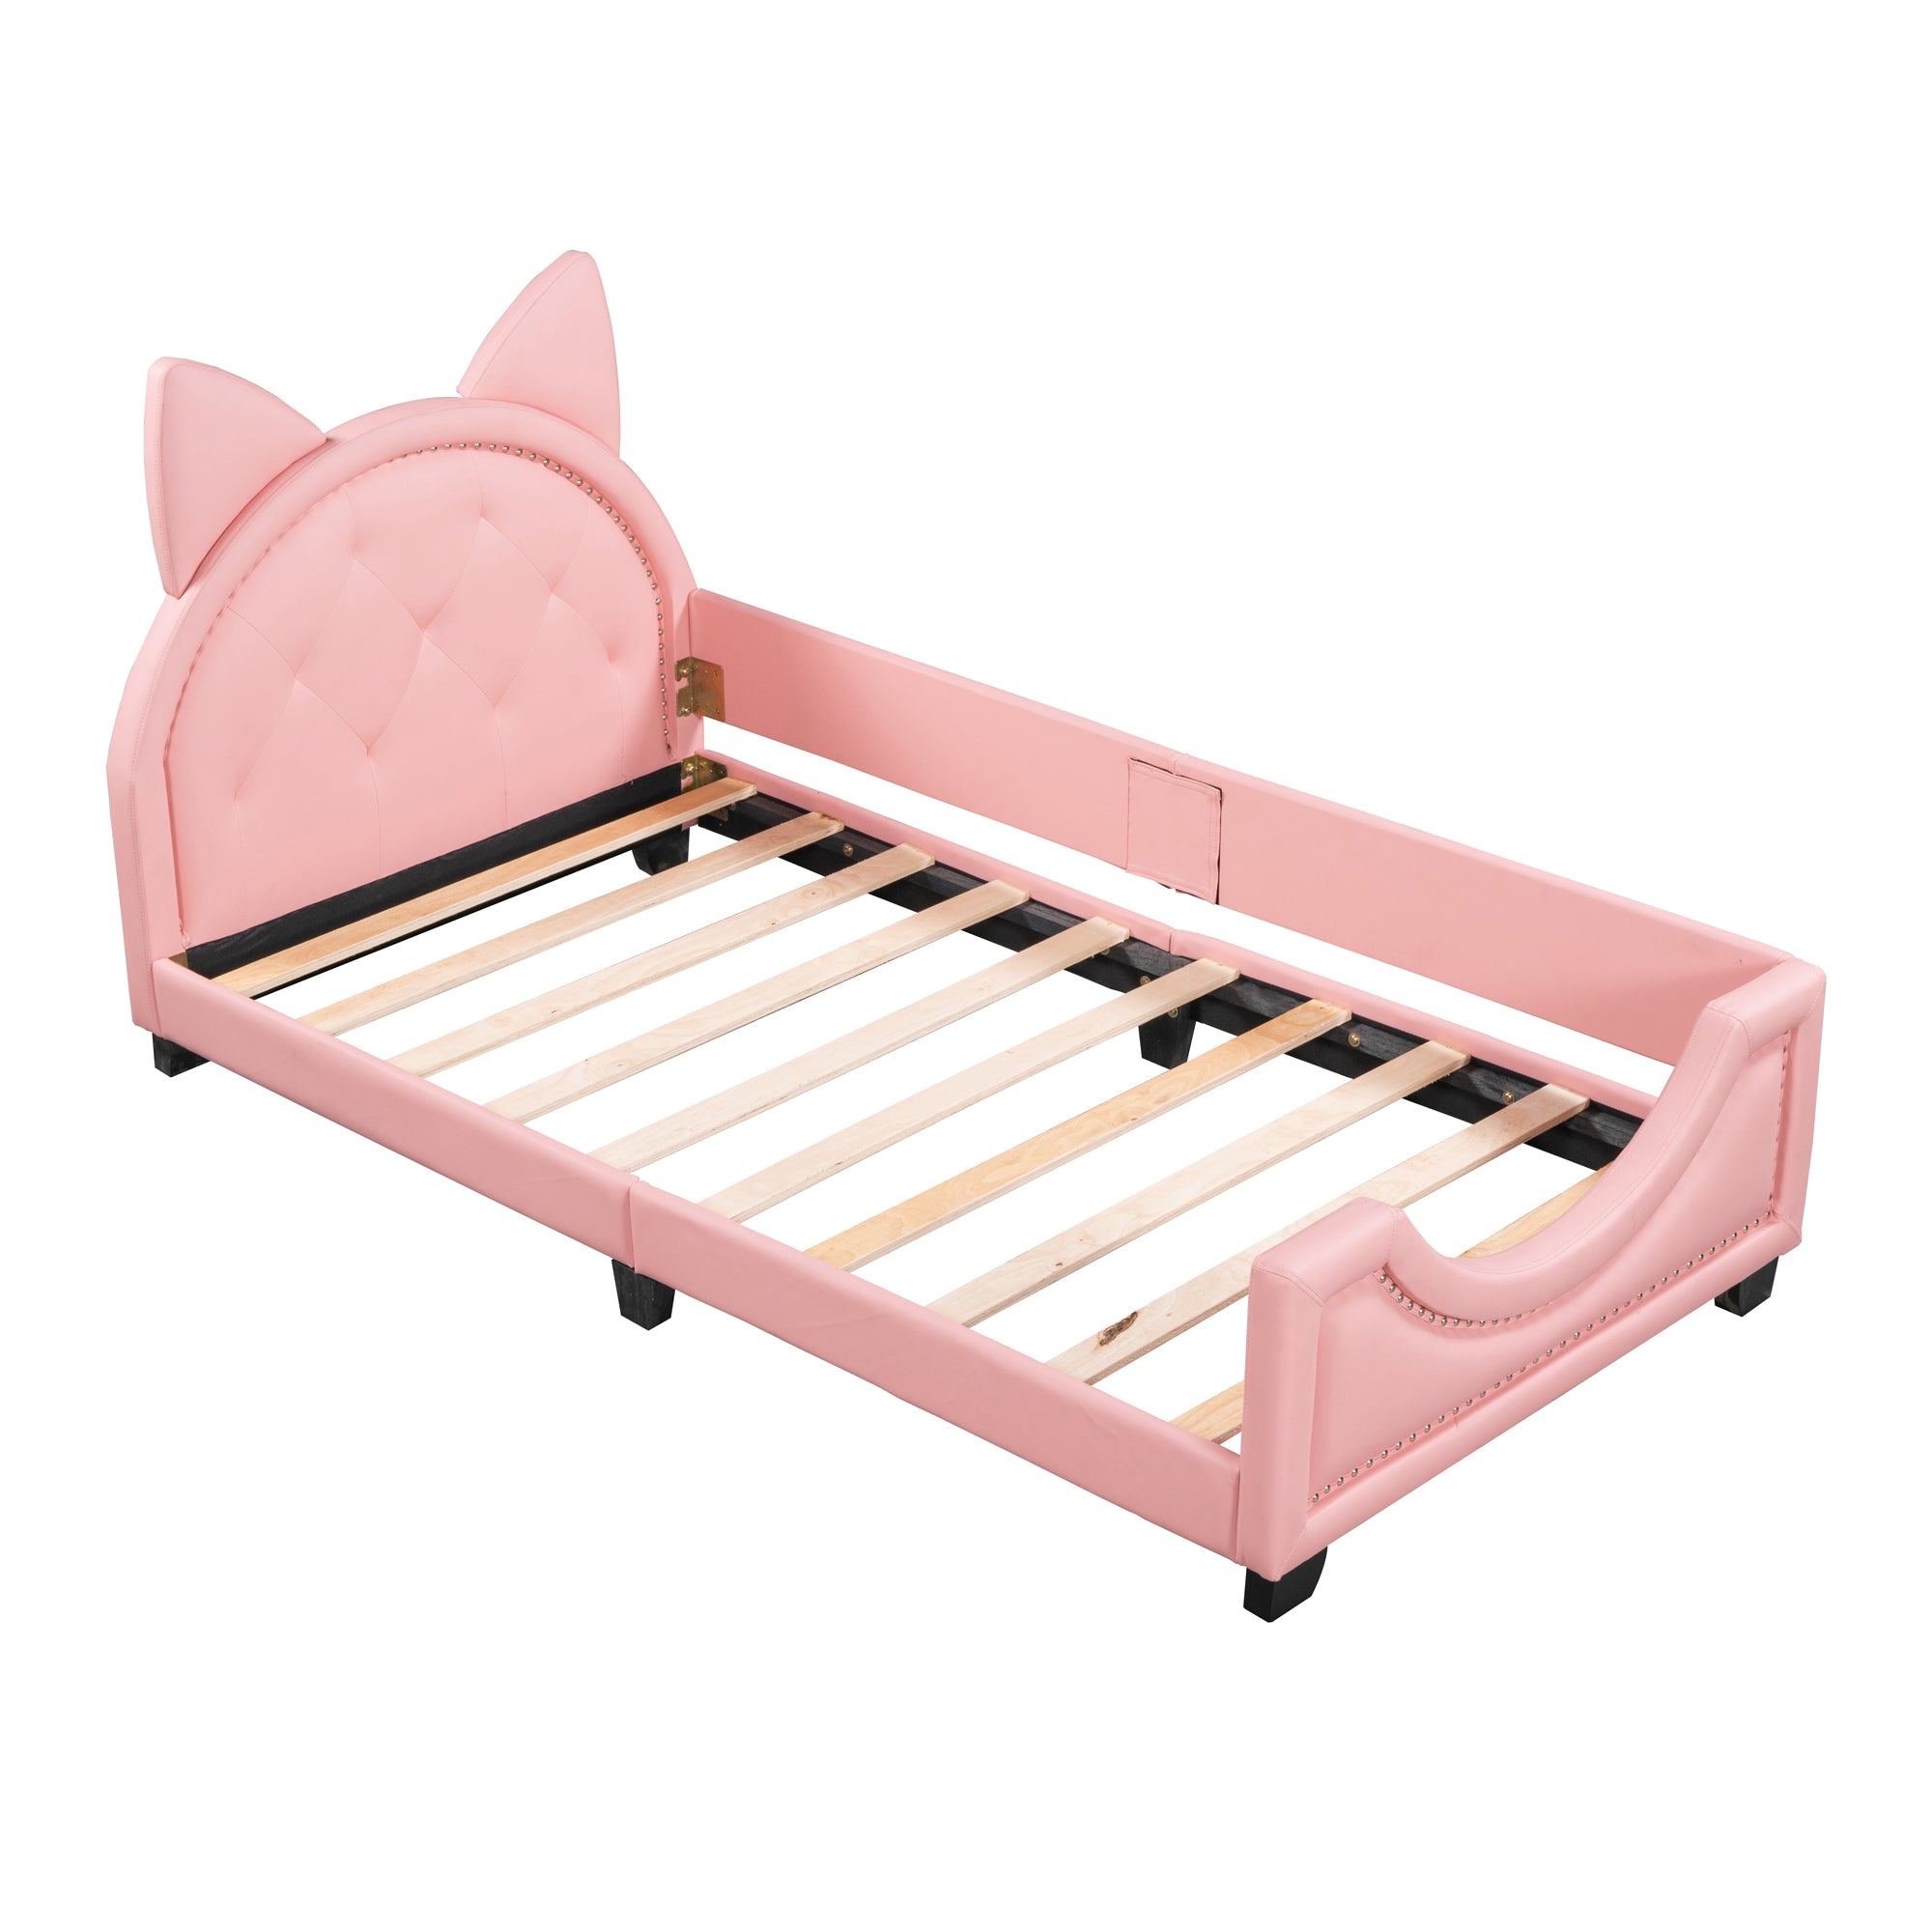 Merida Pink Faux Leather Twin Platform Bed